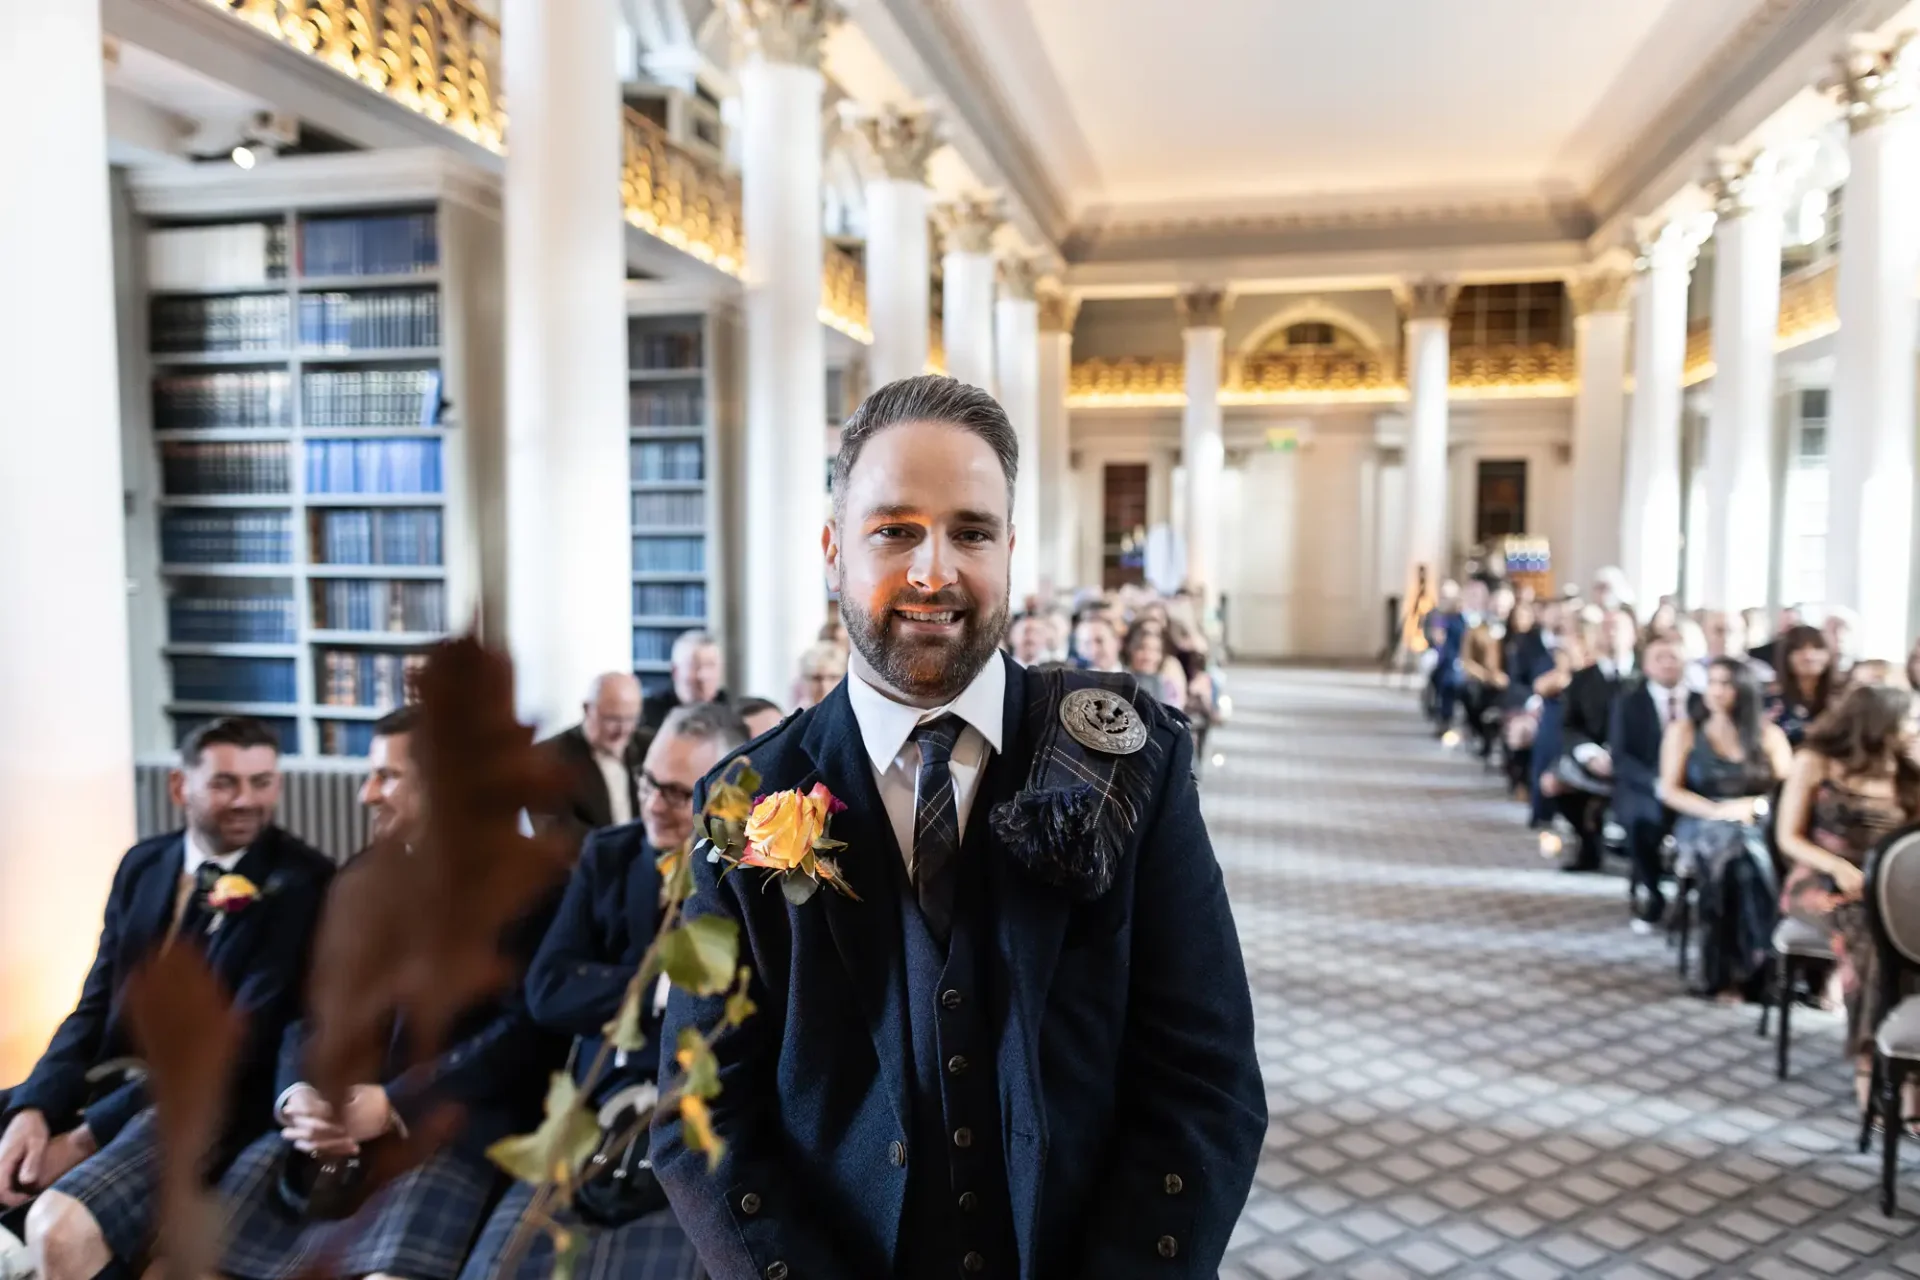 A smiling groom in a kilt walking down the aisle in a library setting with seated guests blurred in the background.